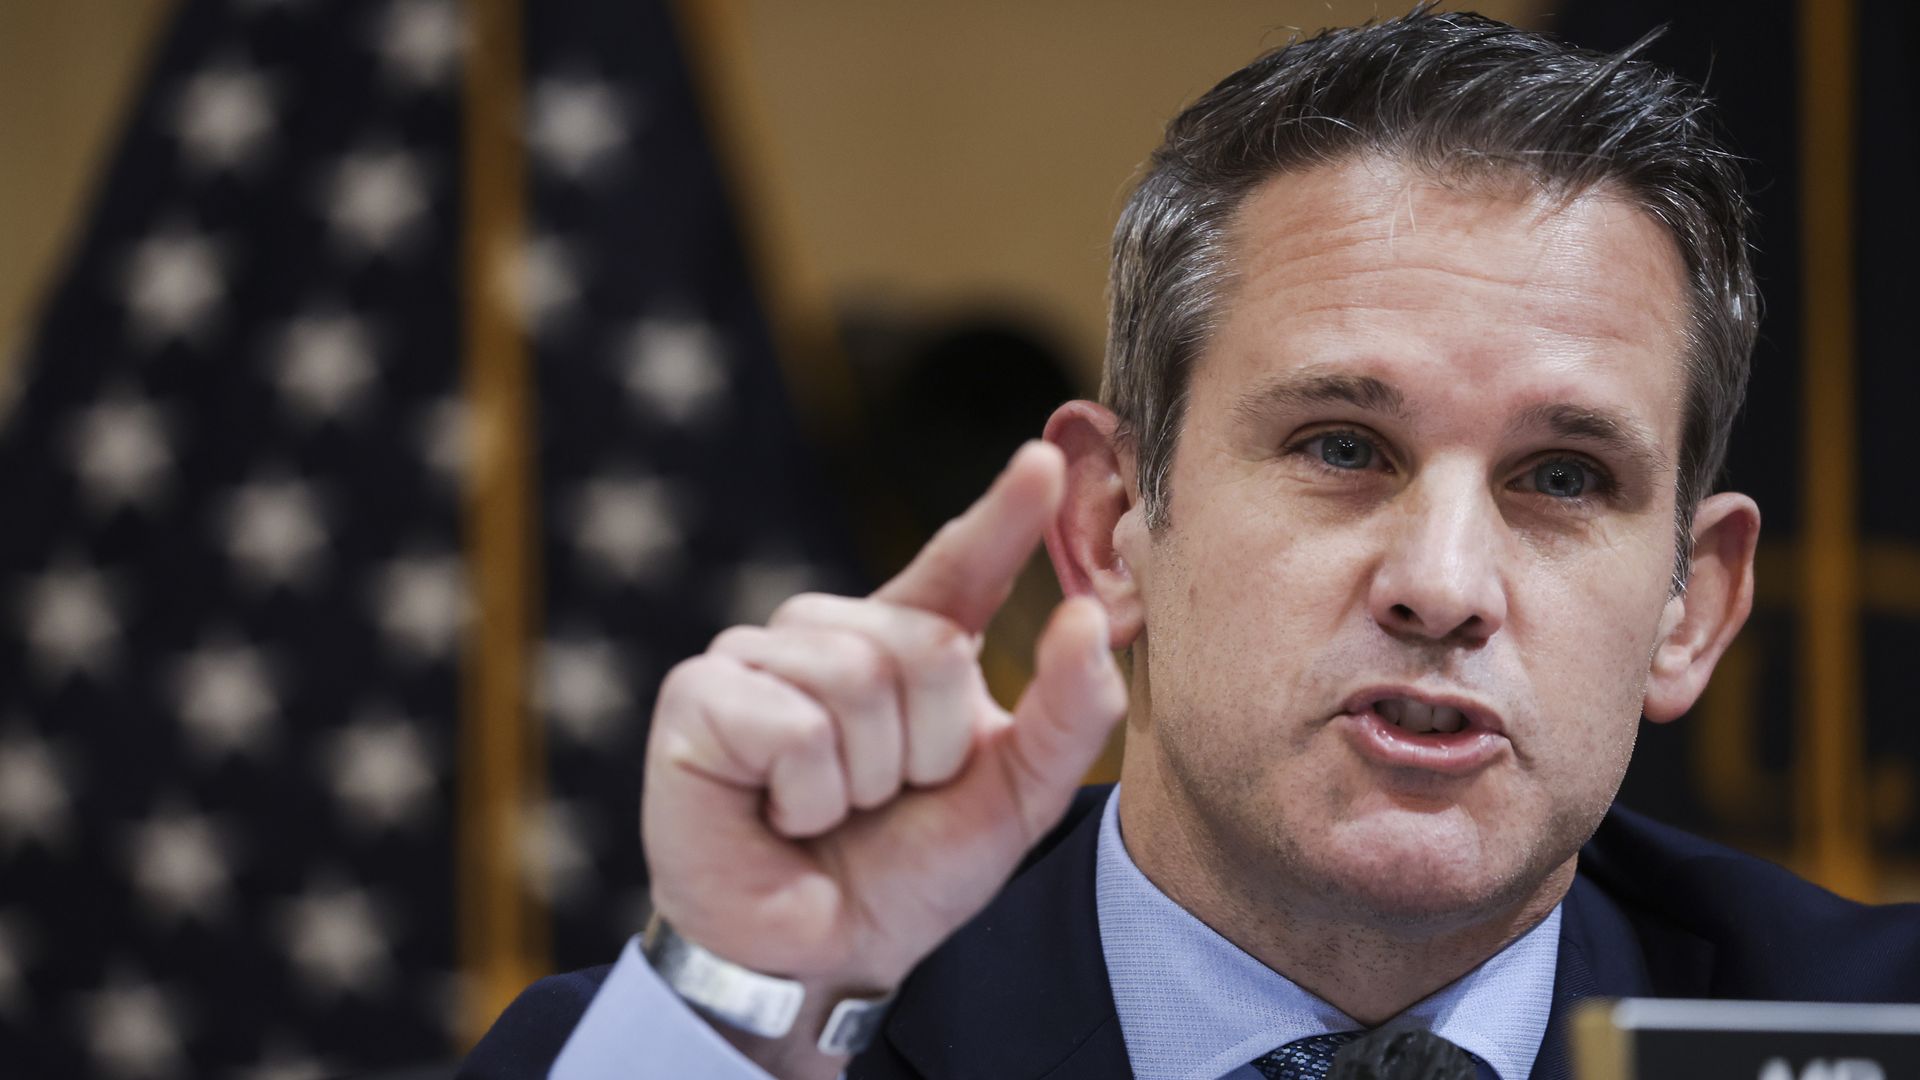 Photo of Adam Kinzinger speaking while raising a finger in the air